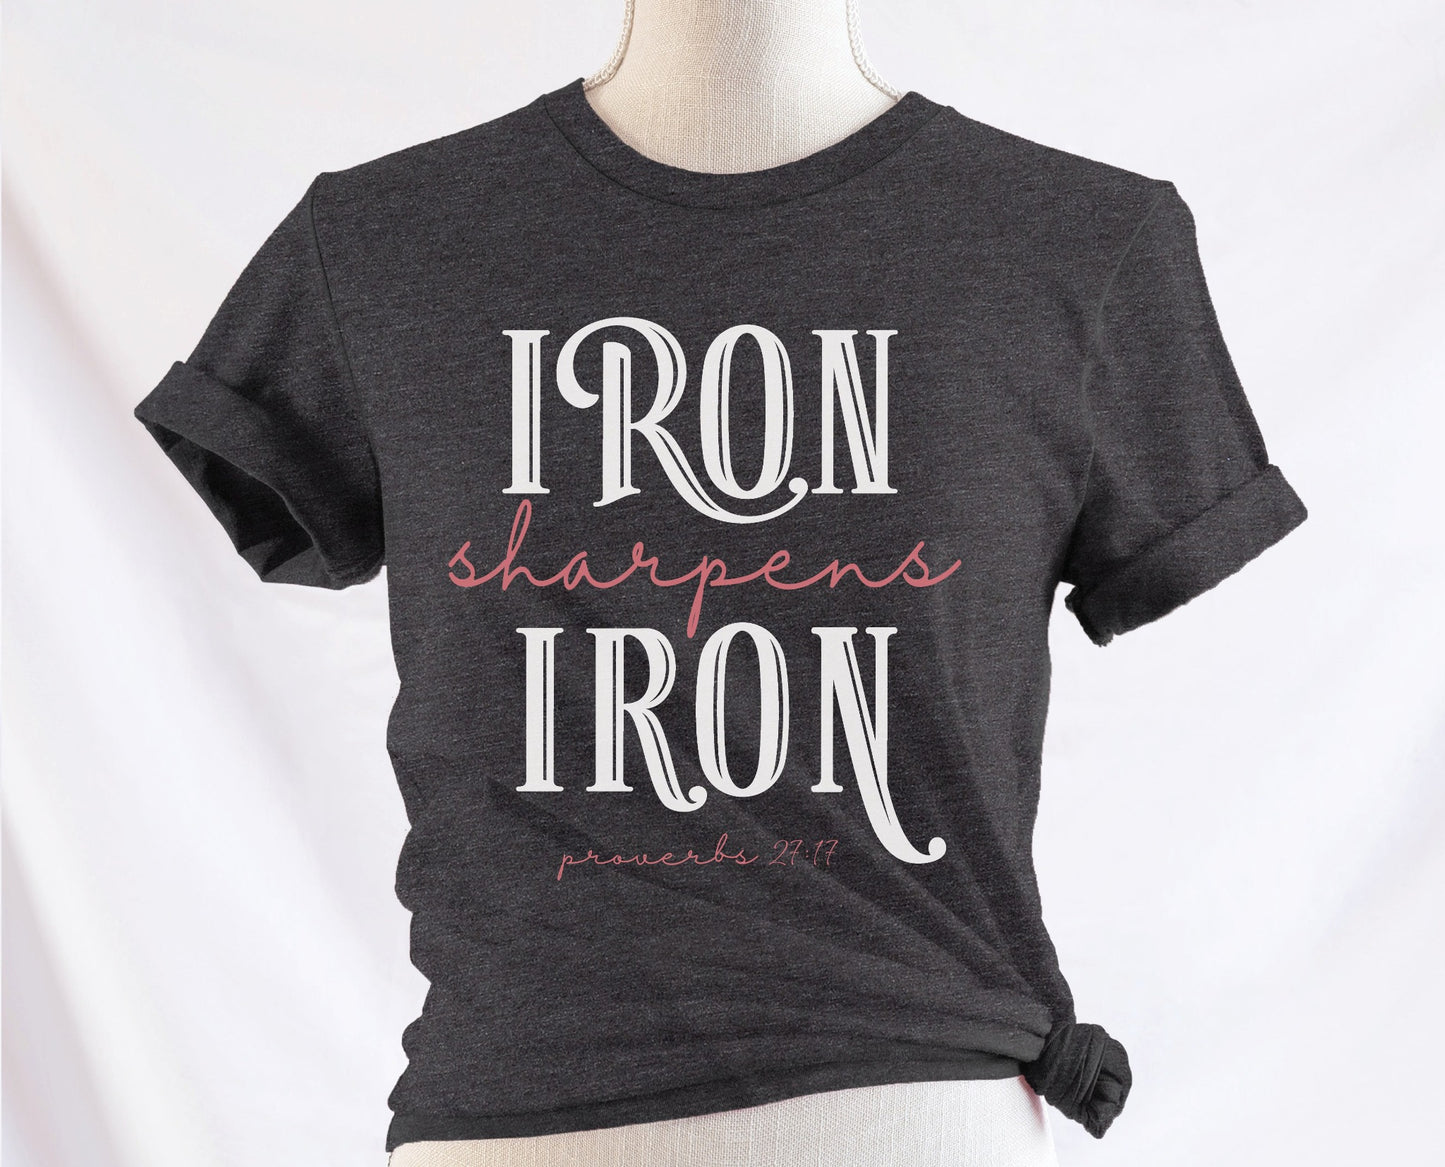 Iron Sharpens Iron Proverbs 27:17 Christian aesthetic design printed in white and mauve on soft heather dark gray unisex t-shirt for women's groups